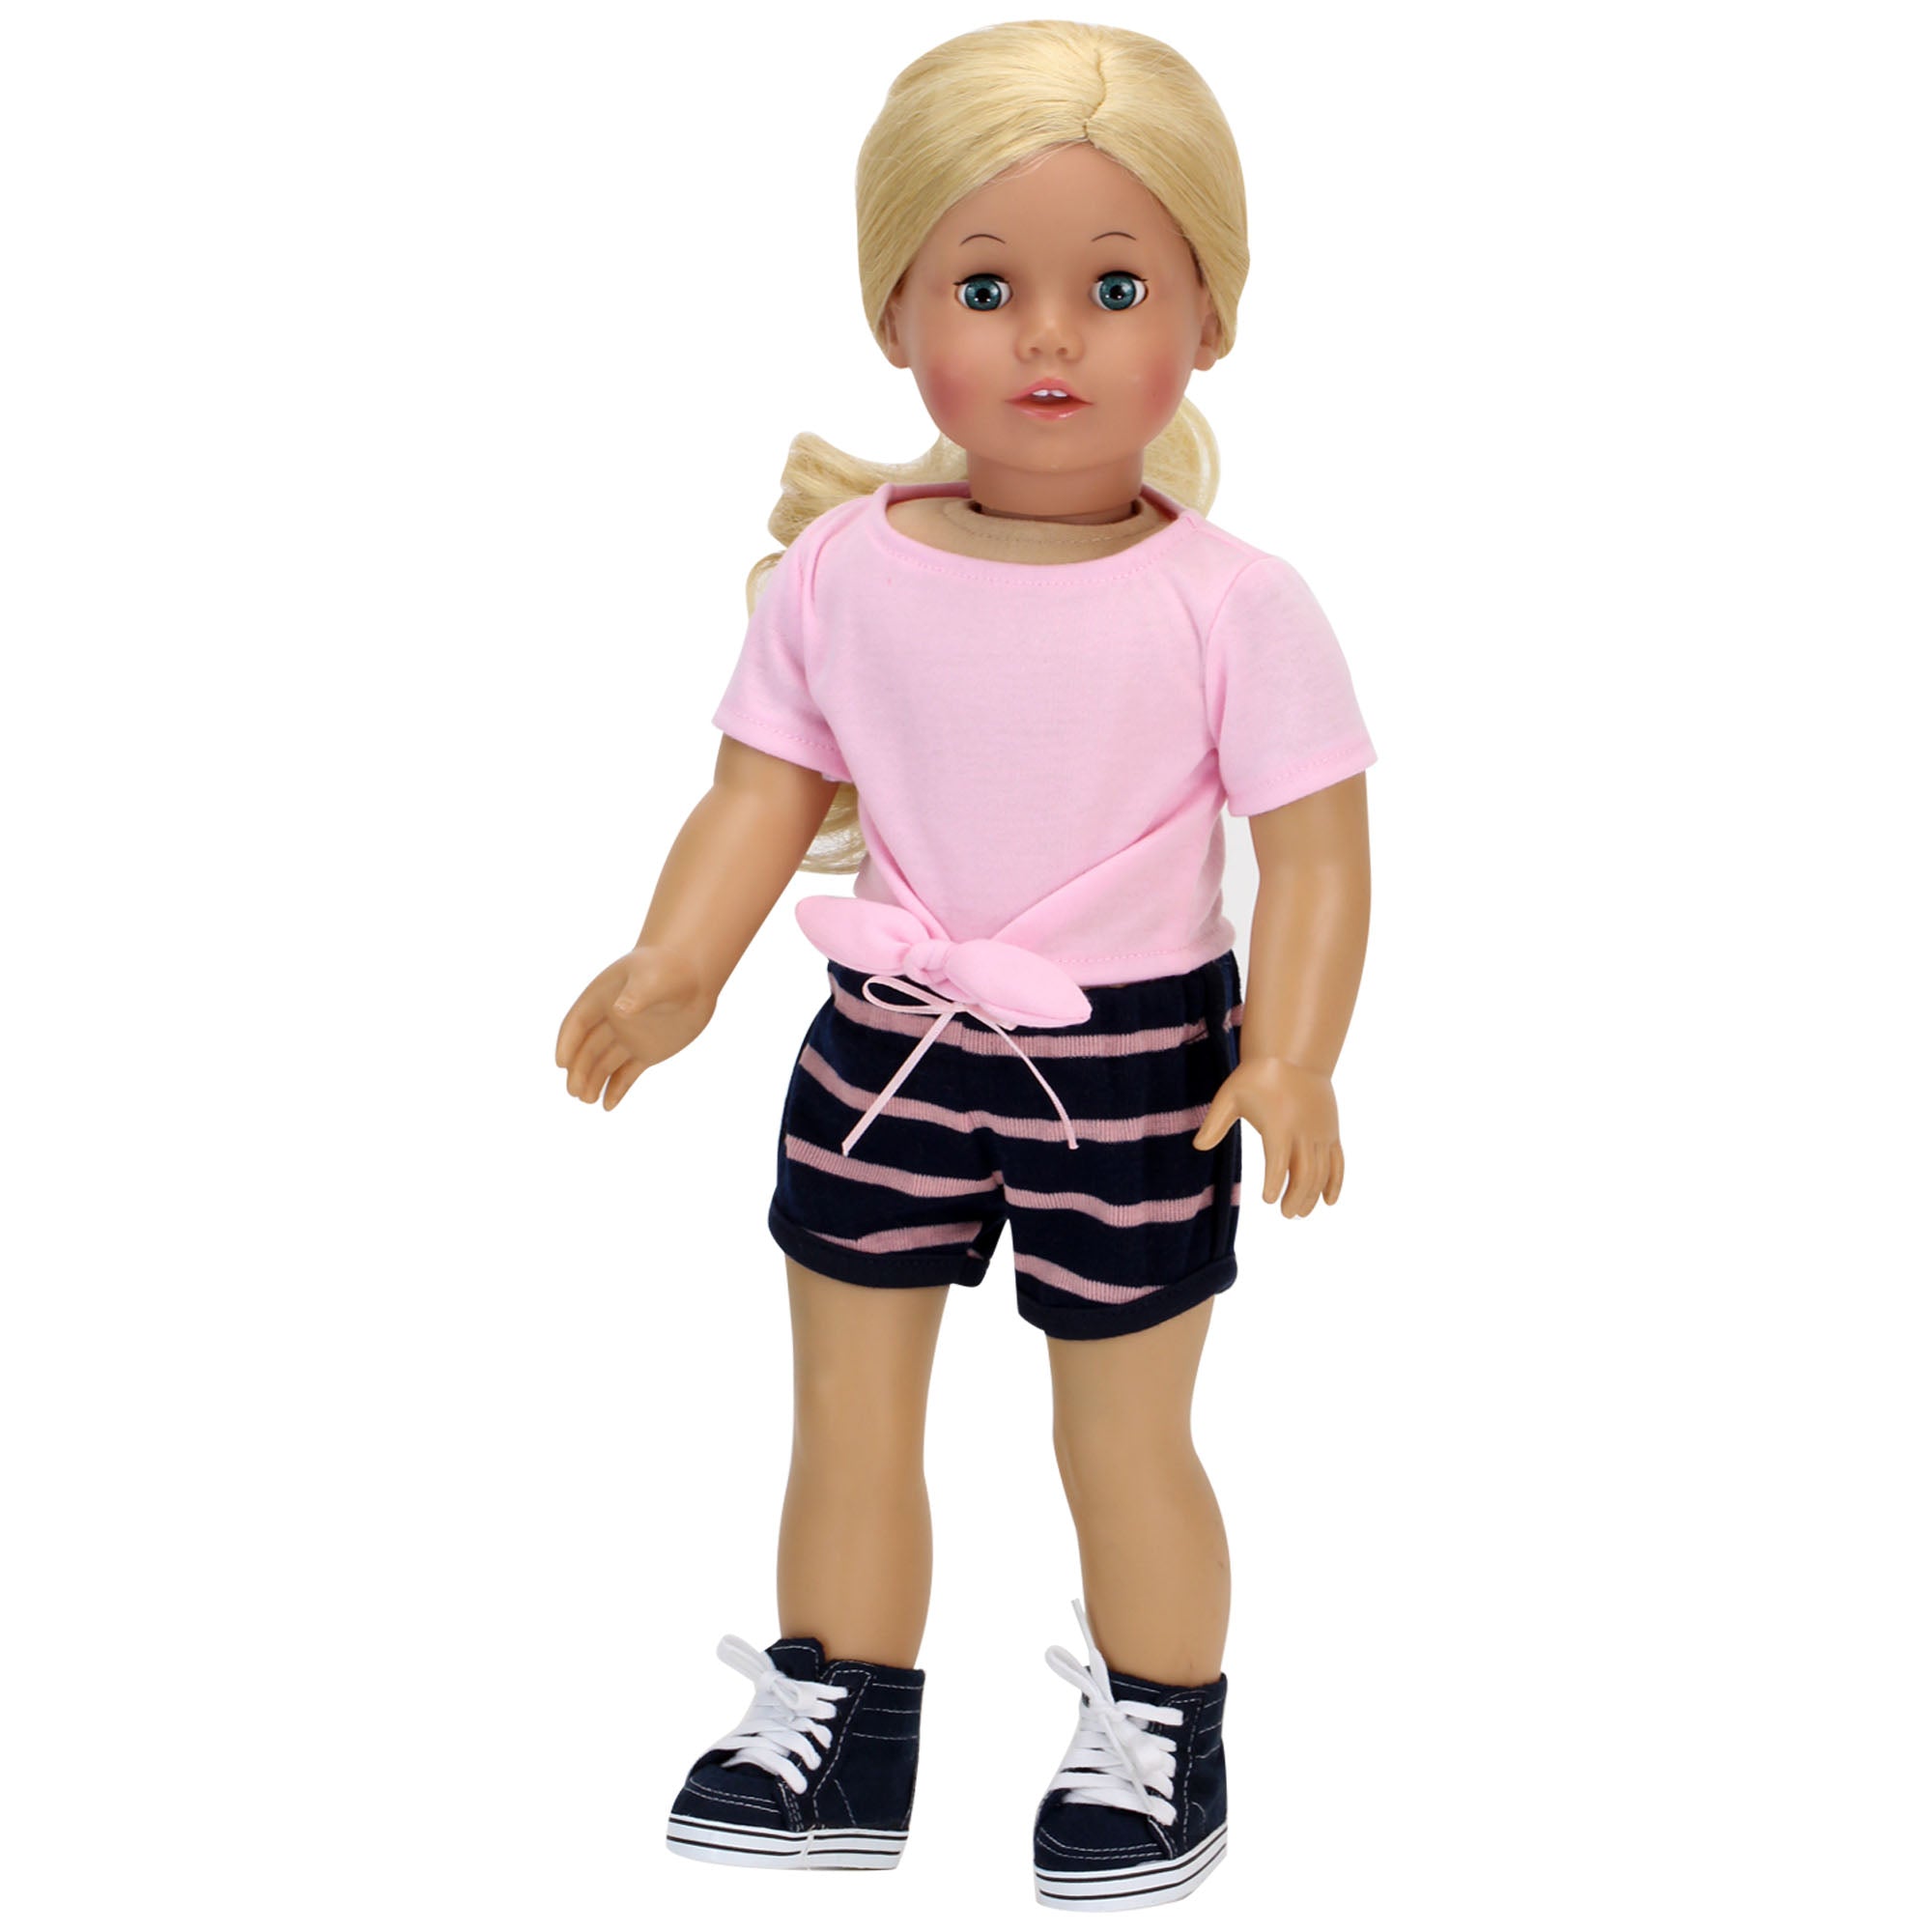 Sophia's 2 Piece Summer Outfit with Tie Front Tee and Striped Shorts for 18" Dolls, Pink/Navy